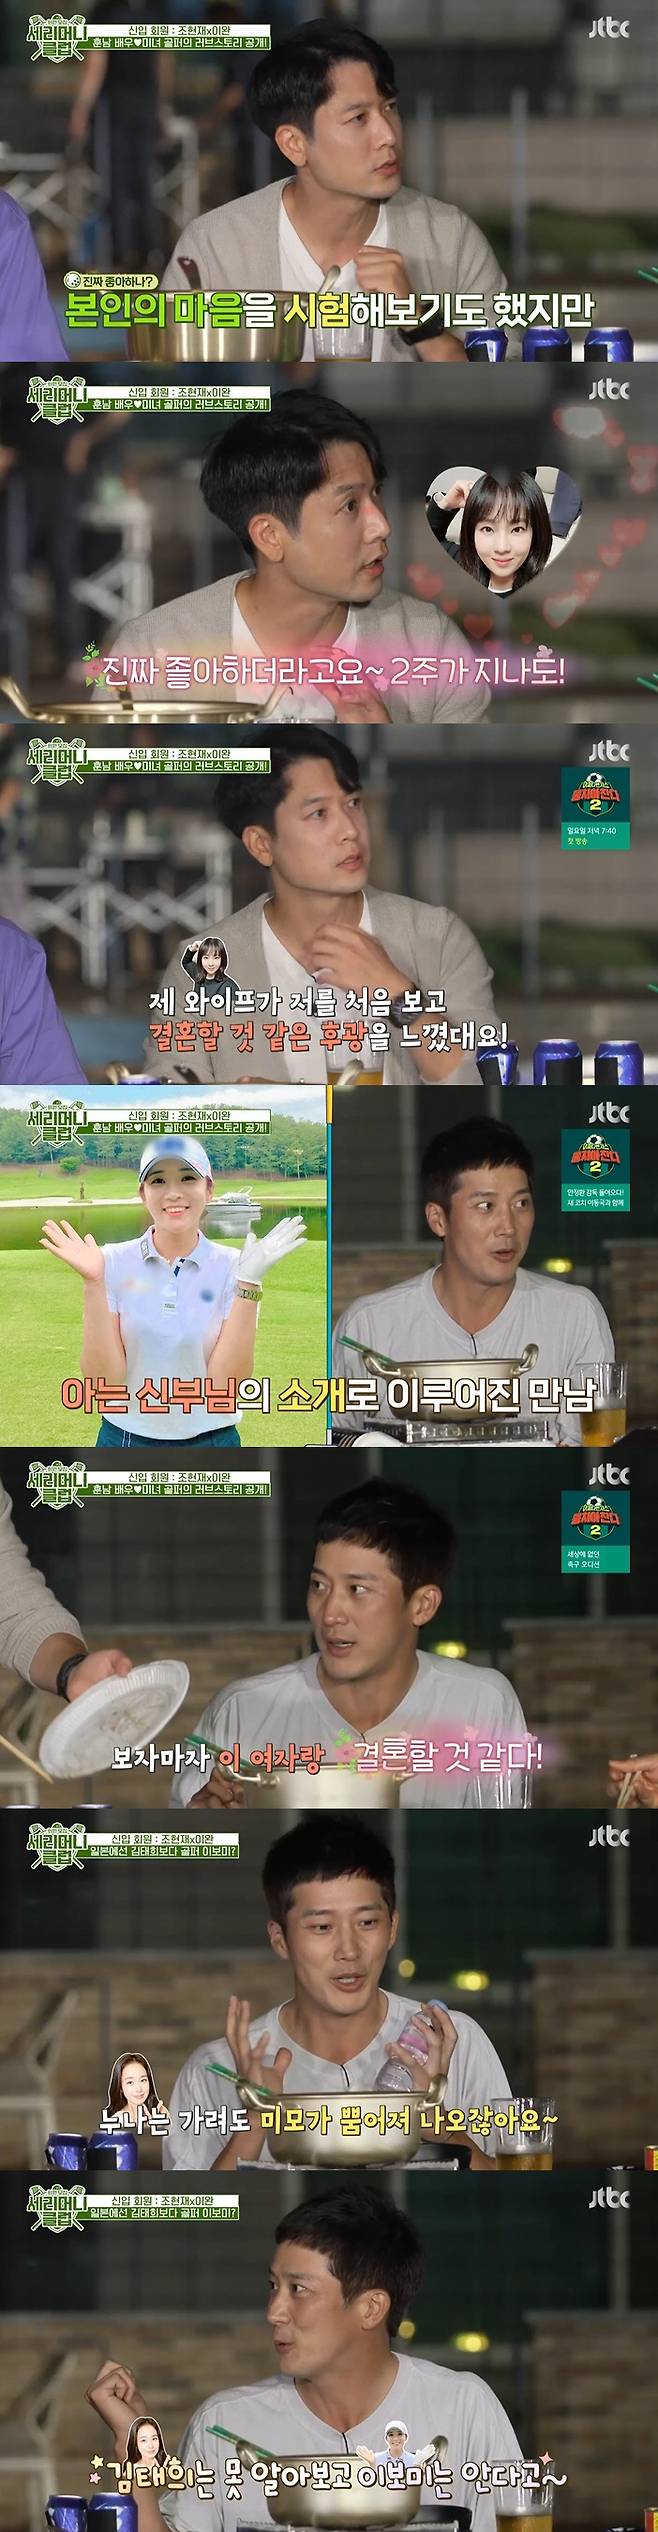 Actor Lee Wan has envied his wife Lee Bo-mee, who is a JLPGA active player, by revealing his honeymoon life from LoveKahaani.JTBCs Appointment of Members - Serim Sams Club (hereinafter referred to as Serimum Sams Club), which was broadcast on the 4th, depicted Lee Wan and Jo Hyun-jae, who were on the honor of a professional golfers wife, challenging a Hallpa donation mission with 50 million serems.I hit really well, Pak Se-ri praised Lee Wan after the first half.Kim Jong-kook was also impressed, saying, Im more serious about Golf than I am about my skills because I cant hit well and I cant hit well. But for Jo Hyun-jae, Jo Hyun-jae is also sincere.The excuse is sincere. Jo Hyun-jae said, I want to make up for the humiliation of the whole. Lee Wan and Jo Hyun-jae tried video calls to get the golfer wives flags ahead of the second-half Holfa donation mission.First, Jo Hyun-jaes wife, Park Min-jung, received a call; the members asked, What did you think I would have done with my husband?Park Min-jung, who heard this, said, I think I hit myself. I do not do as I say.Even in the usual times (Jo Hyun-jae) have many excuses like this, Pak Se-ri said, and Park Min-jung replied, There are a lot of excuses.Park Min-jung also said, I told my husband to follow everything from breathing to walking, he said. Do not walk alone, listen to what the pro says and follow it all the time.Lee Wan then also spoke to his wife Lee Bo-mee on video, who, as soon as Lee Bo-mee answered the phone, said, Why are you doing this beautiful?I want to go home quickly, he said, showing off his sweet affection for newlyweds.Lee Bo-mee said, I am sorry that I can not see my husband often even though I am newly married. I am sorry, but my brother expressed a lot of expressions.When asked about Lee Wans score as a husband, he said, I can give you more than 100 points.Kim Jong-kook and Yang Se-chan expressed jealousy, saying, Did you come out of the two comments? And Is there a script?Lee Bo-mee was relieved to say her husbands score was good and said, I was very nervous before rounding.Fighting on the mission, he said, cheering me full of charm, and Lee Wan smiled, I will finish it soon. However, Lee Wan and Jo Hyun-jae failed to perform the final mission, and they were disappointed. The members enjoyed the barbecue after-sales to appease their regrets.Lee Wan and Jo Hyun-jae confided in their respective LoveKahaani.First, Jo Hyun-jae said, I know that I have a hole while playing Golf, and my wife came in the vacancy.But after two weeks, I kept thinking, he said. I looked into whether the mind was real or not.I thought about it after two weeks, so I contacted Golf Lesson on the excuse and met it. If you meet someone who seems to be marriage, you can see the halo. But that day my wife felt the halo when she first saw me.But I can not call my pride and I waited for my contact, but it seems strange. Lee Wan said, There is a bride my mother knows and she wants to meet me once (with Lee Bo-mee).My mother arranged it, he said. As soon as I saw it, I thought I would marriage with this woman.I met him, I learned more, and I continued to do so. But Lee Bo-mee had come out to see Kim Tae-hee, not Lee Wan, when he first met.Lee Wan explained, I came to eat together without knowing that my mother-in-law would like to go to Kim Tae-hee to avoid burdening me.In addition, Lee Bo-mee was laughed at when Lee Wan first saw Lee Bo-mee, unlike what he thought of as a marriage, Lee Bo-mee was told to think of Lee Wan as a horse.Lee Wan attracted attention by saying that his wife Lee Bo-mee is more popular than his sister Kim Tae-hee in Japan.Lee Wan said, Tae Hee went to Japan and took Taxi, and Taxi said that she was a Korean person.My sister is going to go, but my beauty is spouting, so Korean people are always pretty.I like Lee Bo-mee Pro among Korean people. Kim Tae-hee does not know, but Lee Bo-mee knows.Meanwhile, Lee Wans proposal video was also released for the first time. Lee Wan asked about the proposal, I can not be sick because I am a man.However, my wife said, When will you propose? I changed my mind and I prepared it like a man. I edited the photos I have taken while dating with my letter, my family and acquaintance interview, I installed the project in my honeymoon house, showed it. In addition, the video Lee Wan used at the time of the actual proposal was released.In the video, the photos of the two peoples romantic love days were accompanied by the phrase of Lee Wans heartfelt words toward his wife Lee Bo-mee.On the other hand, Jo Hyun-jae said, When I was about three years in love, my wife said, We are so good, we will meet. If we meet like this, we will just go on the way.My wife said, I should live happily because I have a good child and I have a child. So I thought about it, but I thought about it, but I wanted to give it a ring and a bouquet at home and ask for marriage. I did not have a marriage idea at the beginning of my relationship, he said. In fact, I propose my wife.Lee Wan asked if his child would like to play a Golf if he was going to play a player. I will give a soccer player unconditionally if I am a son, and if I am a daughter, I will give Golf unconditionally. But if my wife is going to give Golf,I can not do it, said Pak Se-ri, who heard it. Everything will be difficult, but the whole family should change their lifestyle around one player.Its not easy, its hard to be there without the sacrifice of the whole family, and you cant let them be greedy.It is important to find out what you like so that you can do well. 